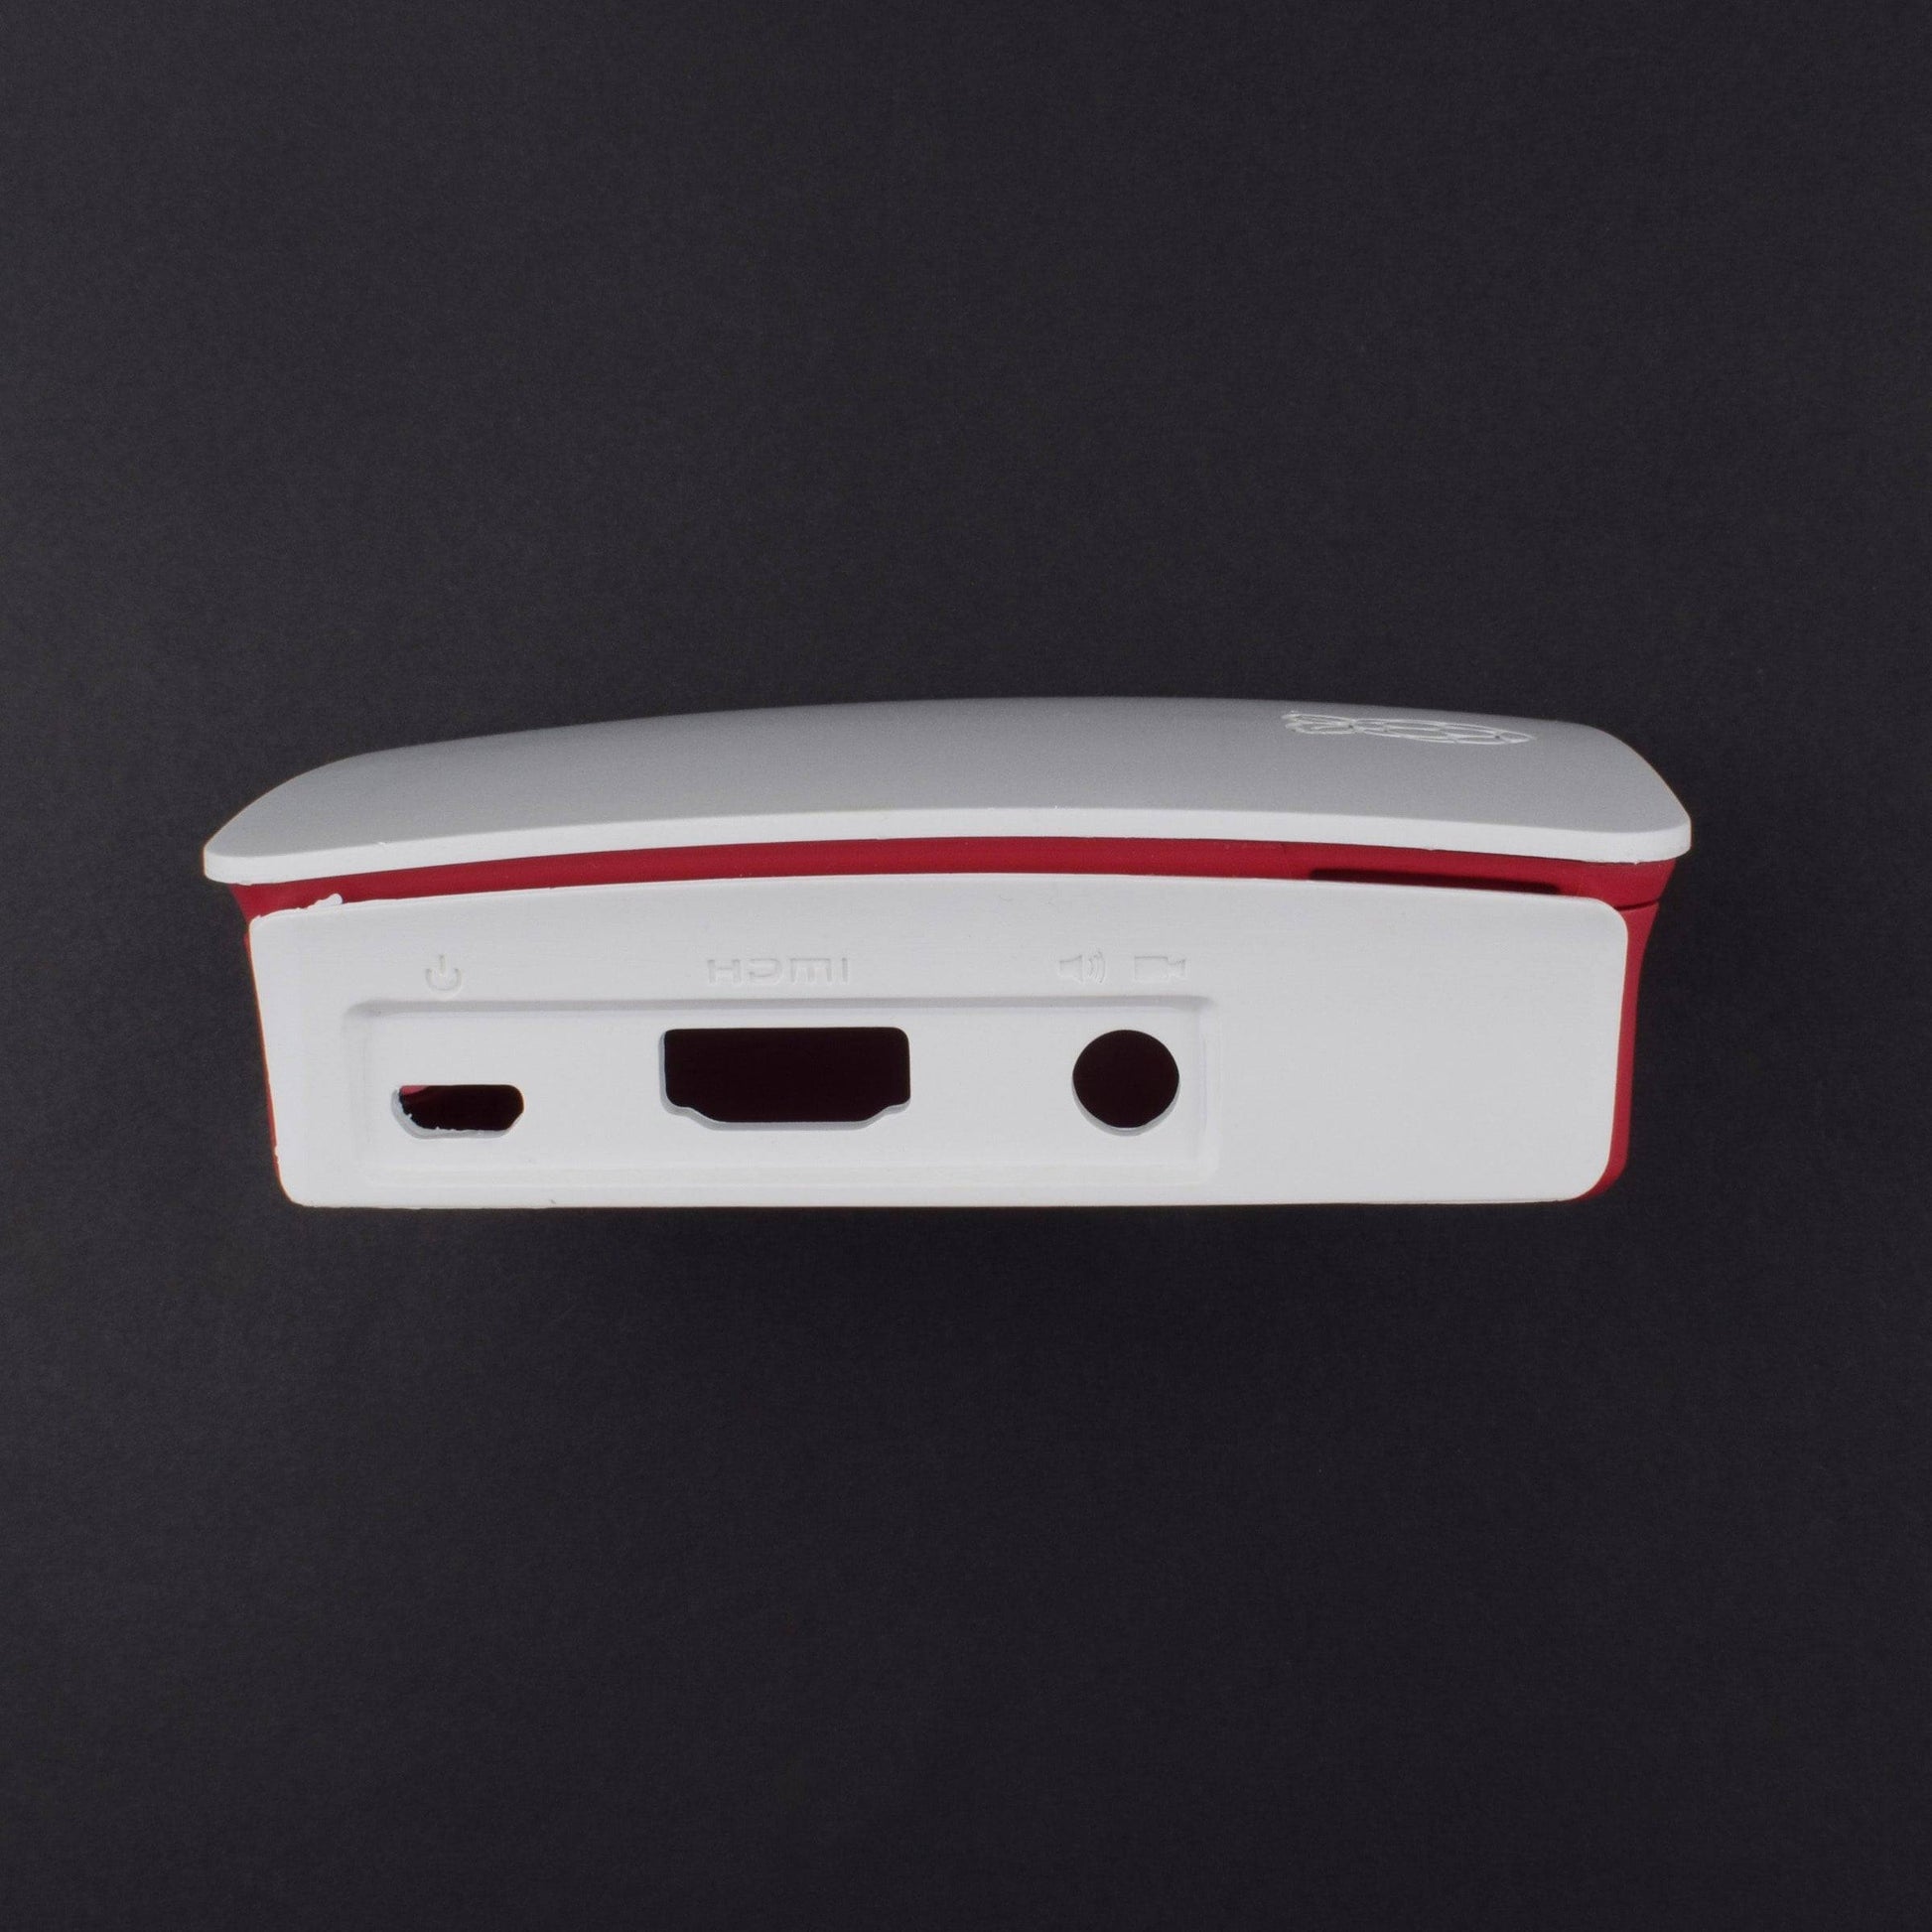 Official Raspberry Pi B+/2/3 Red & White Case - RP610 - REES52